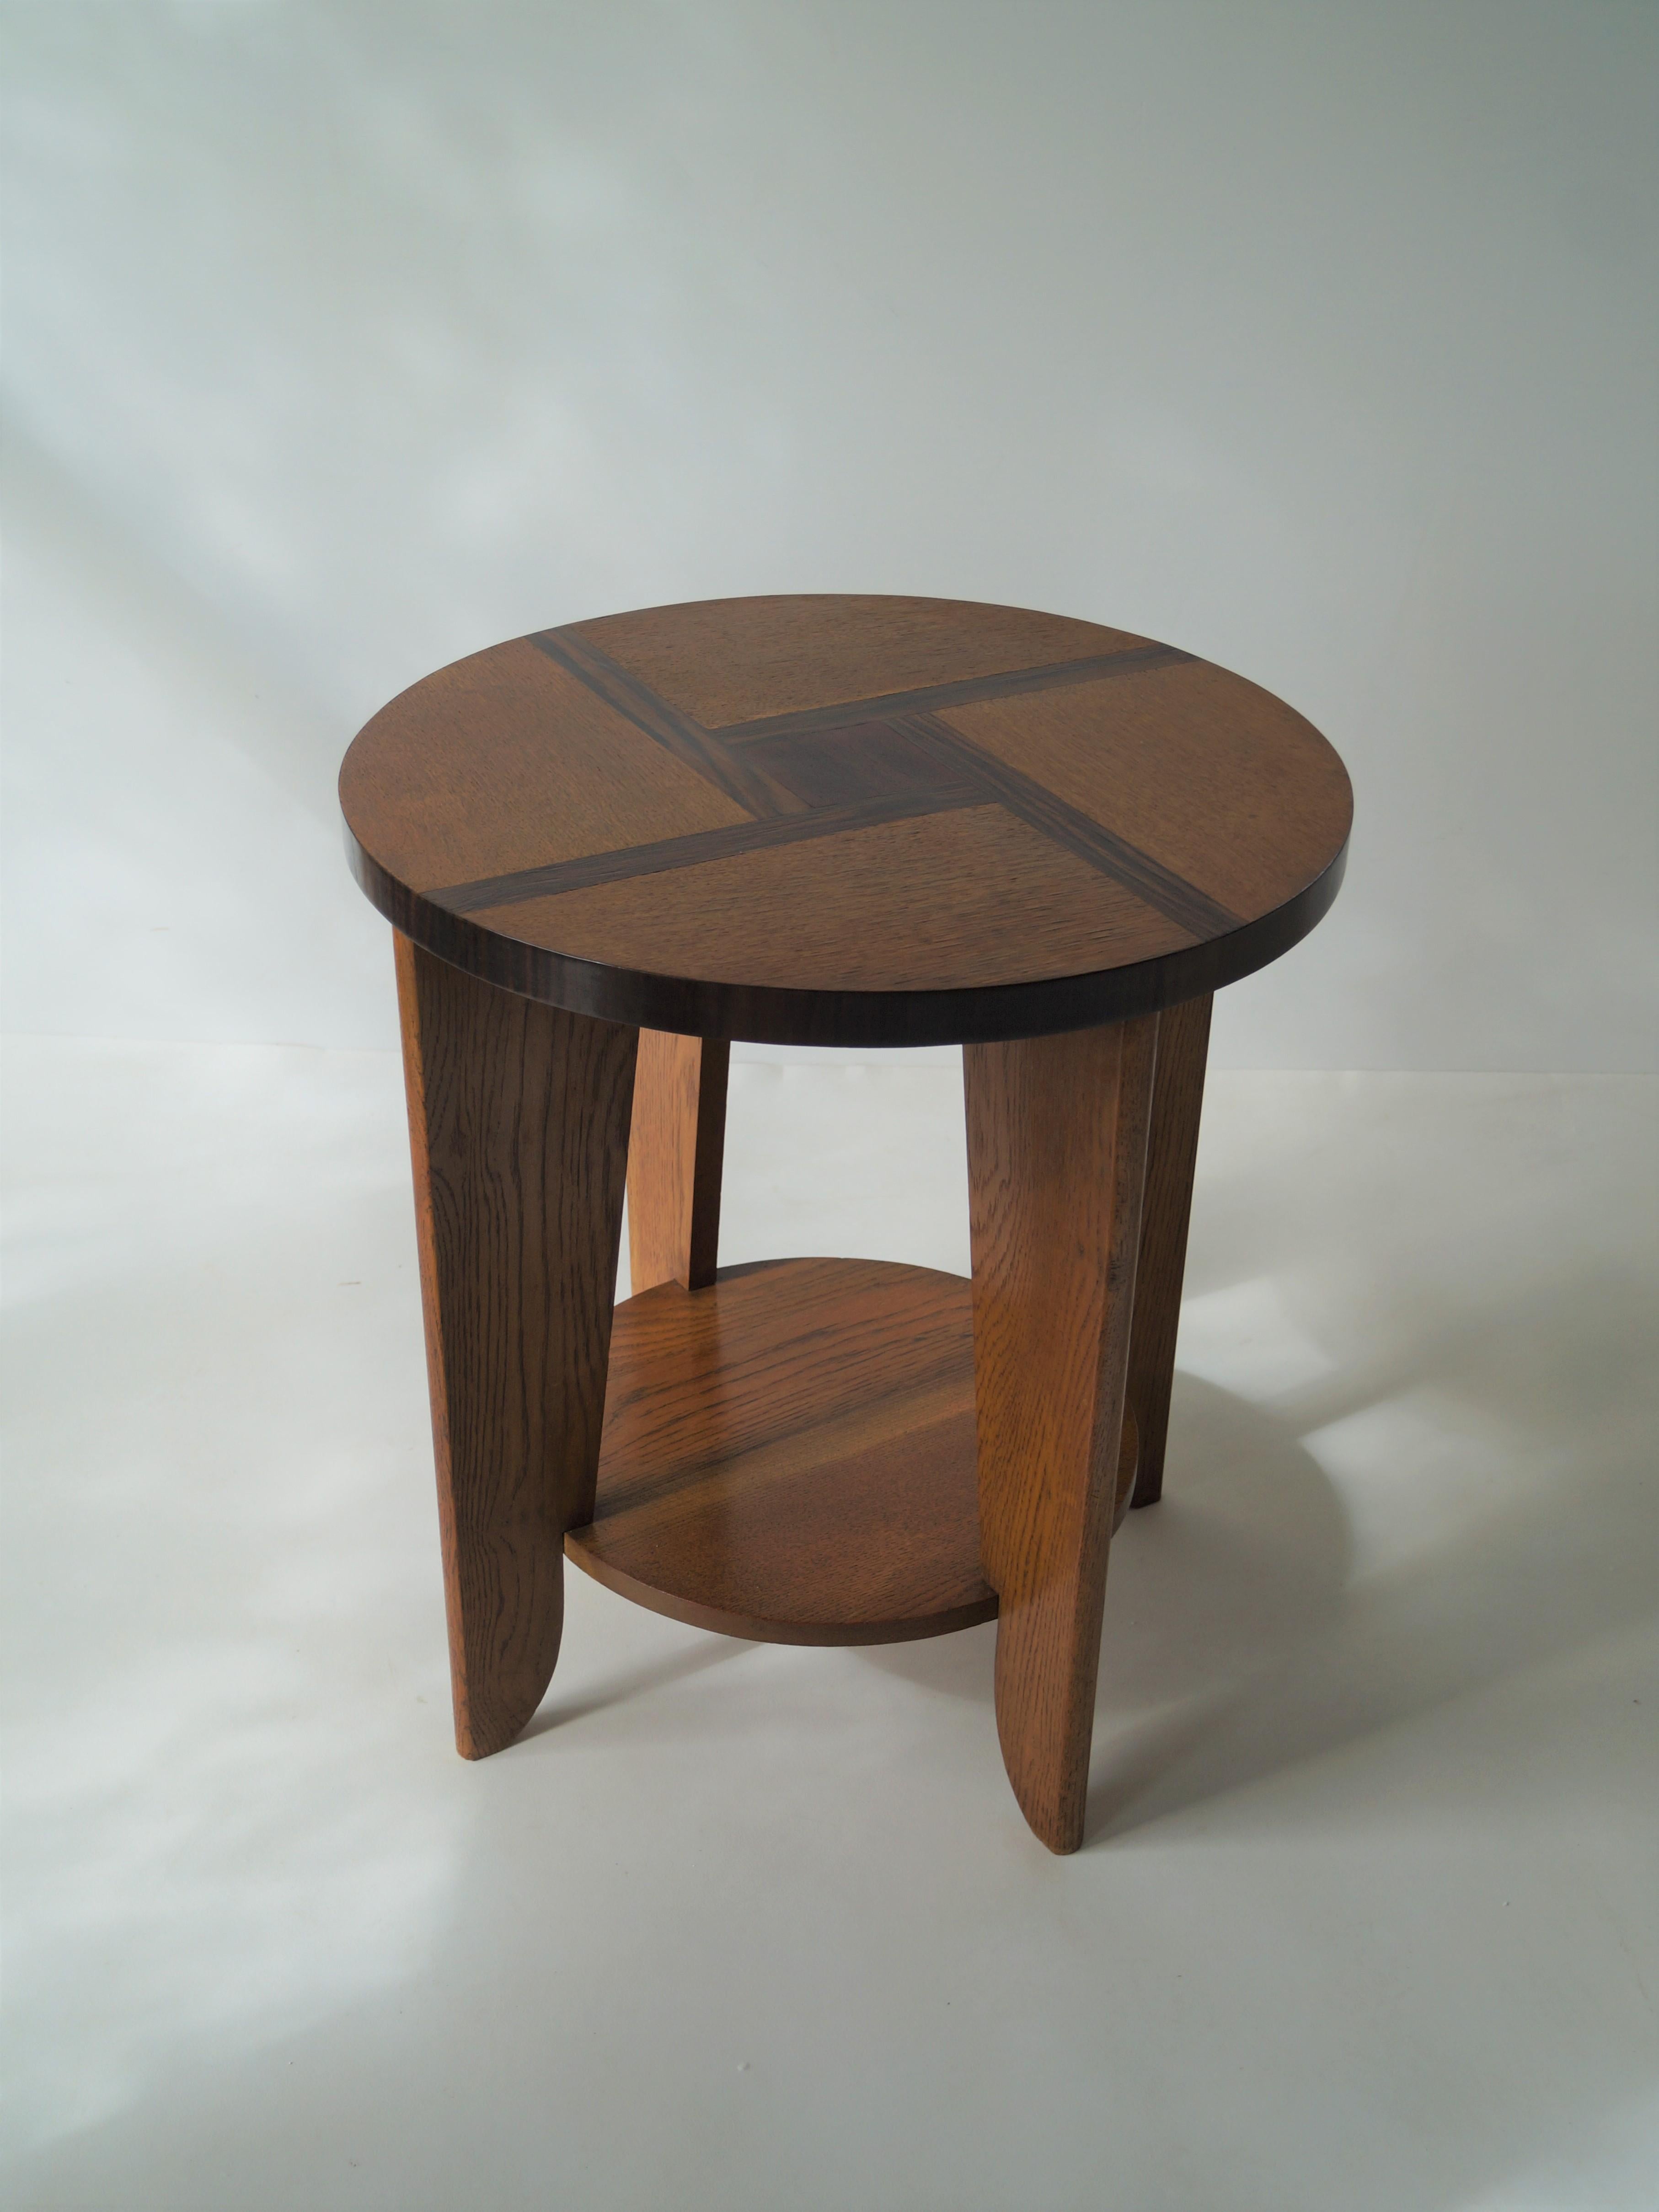 Dutch Art Deco Occasional Table Haagse School, 1930s For Sale 10